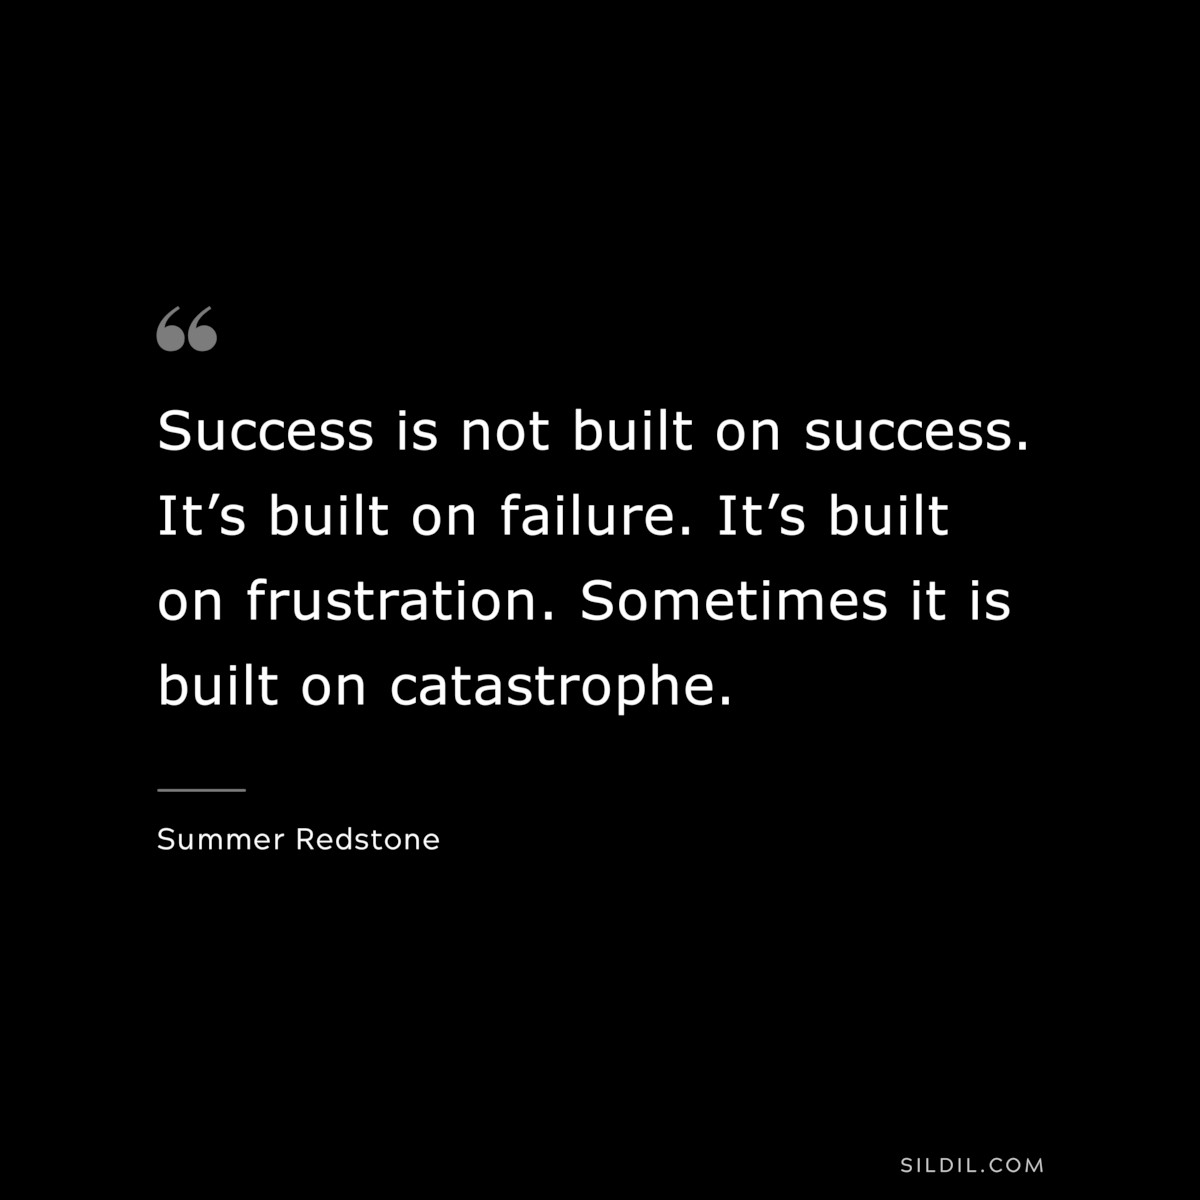 Success is not built on success. It’s built on failure. It’s built on frustration. Sometimes it is built on catastrophe. ― Summer Redstone